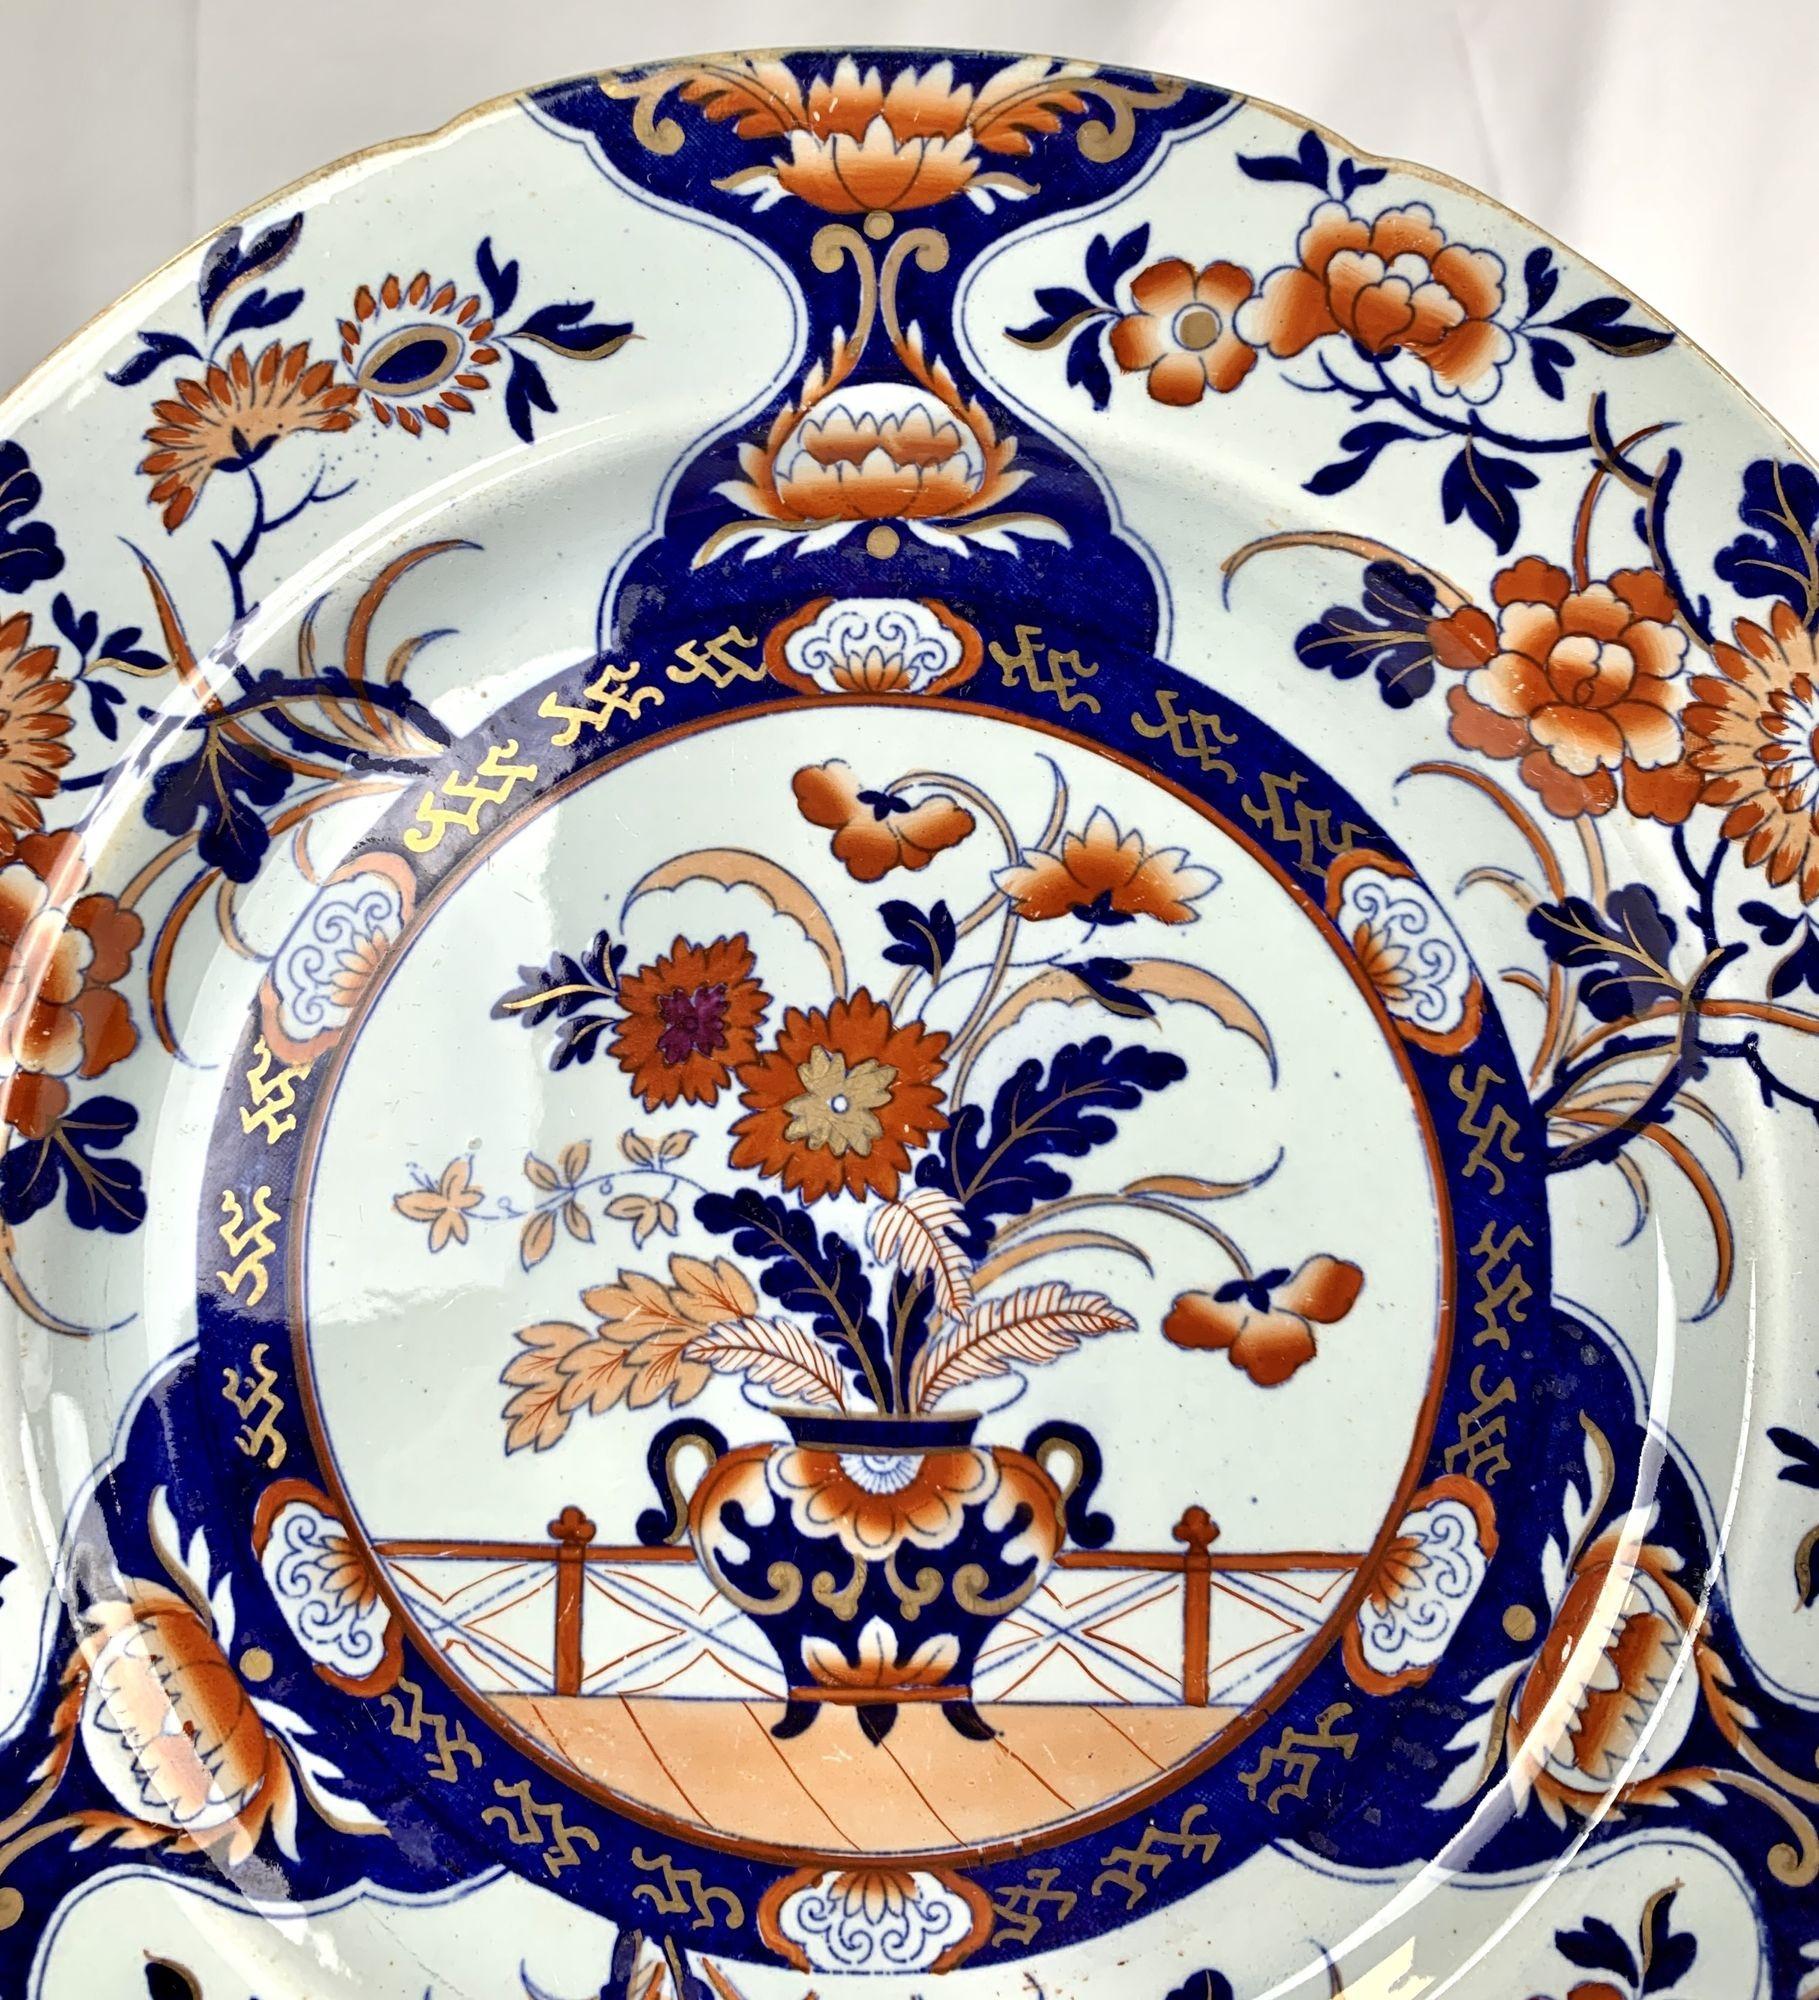 19th Century Imari Plates Dinner Service for Twelve with Salad and Bread & Butter England 